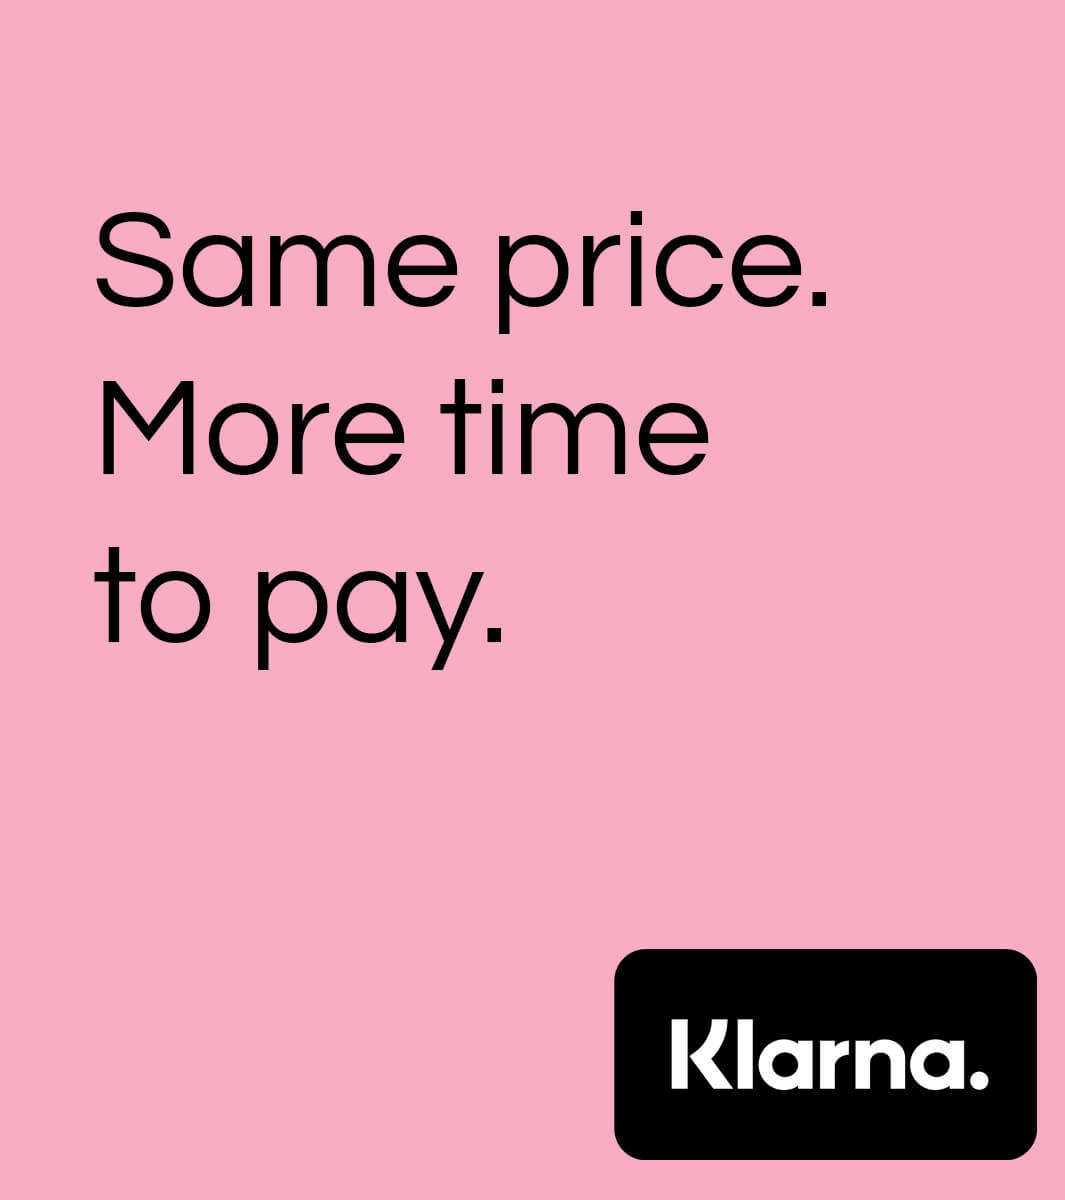 Klarna: More time to Pay